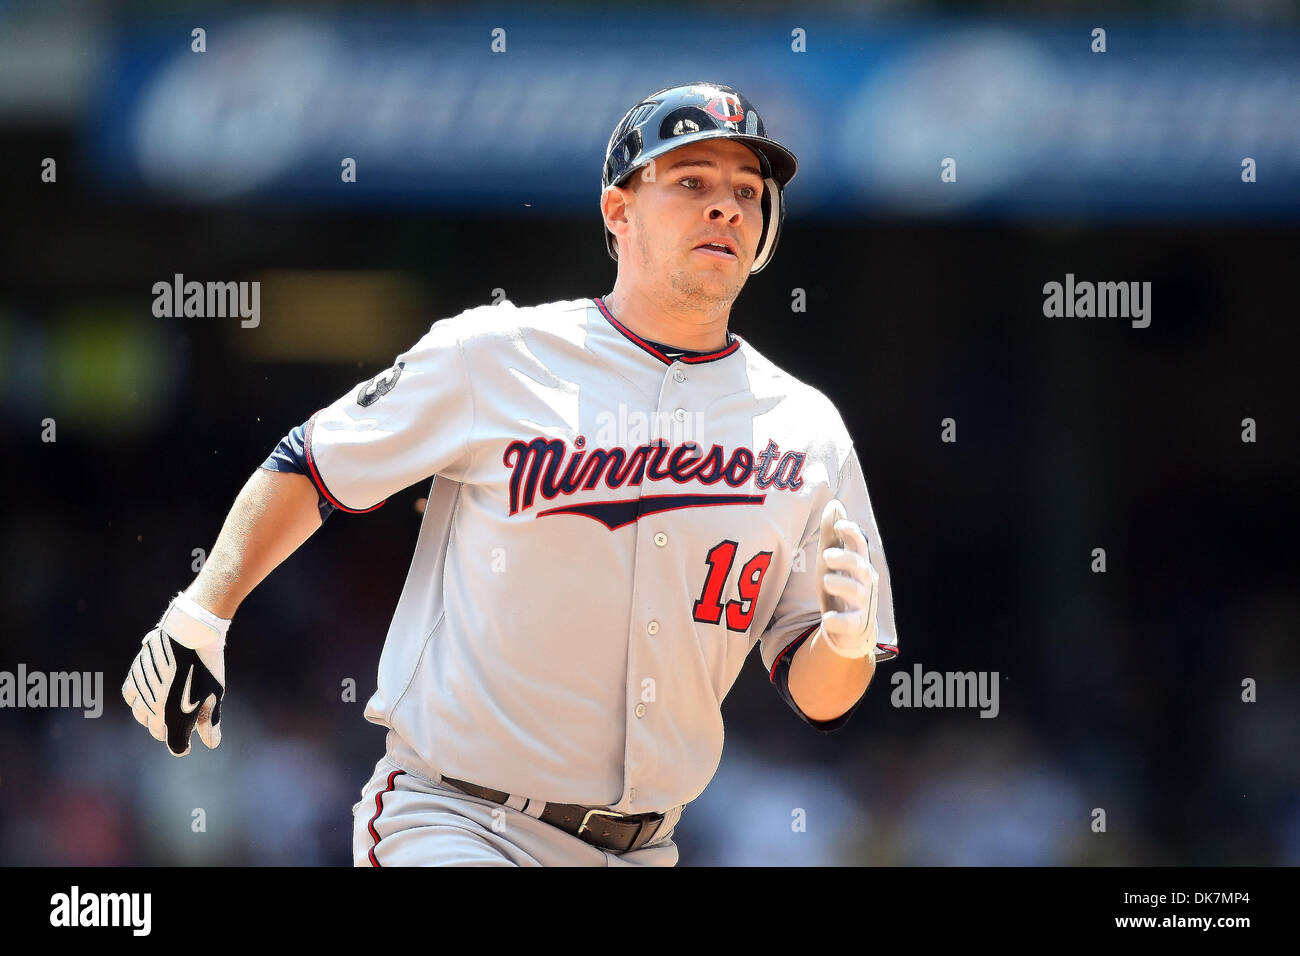 June 26, 2011 - Milwaukee, Wisconsin, U.S - Minnesota Twins third baseman Danny Valencia #19 rounds second base after hitting a triple in the 2nd inning. The Milwaukee Brewers defeated the Minnesota Twins 6-2 at Miller Park in Milwaukee. (Credit Image: © John Fisher/Southcreek Global/ZUMAPRESS.com) Stock Photo